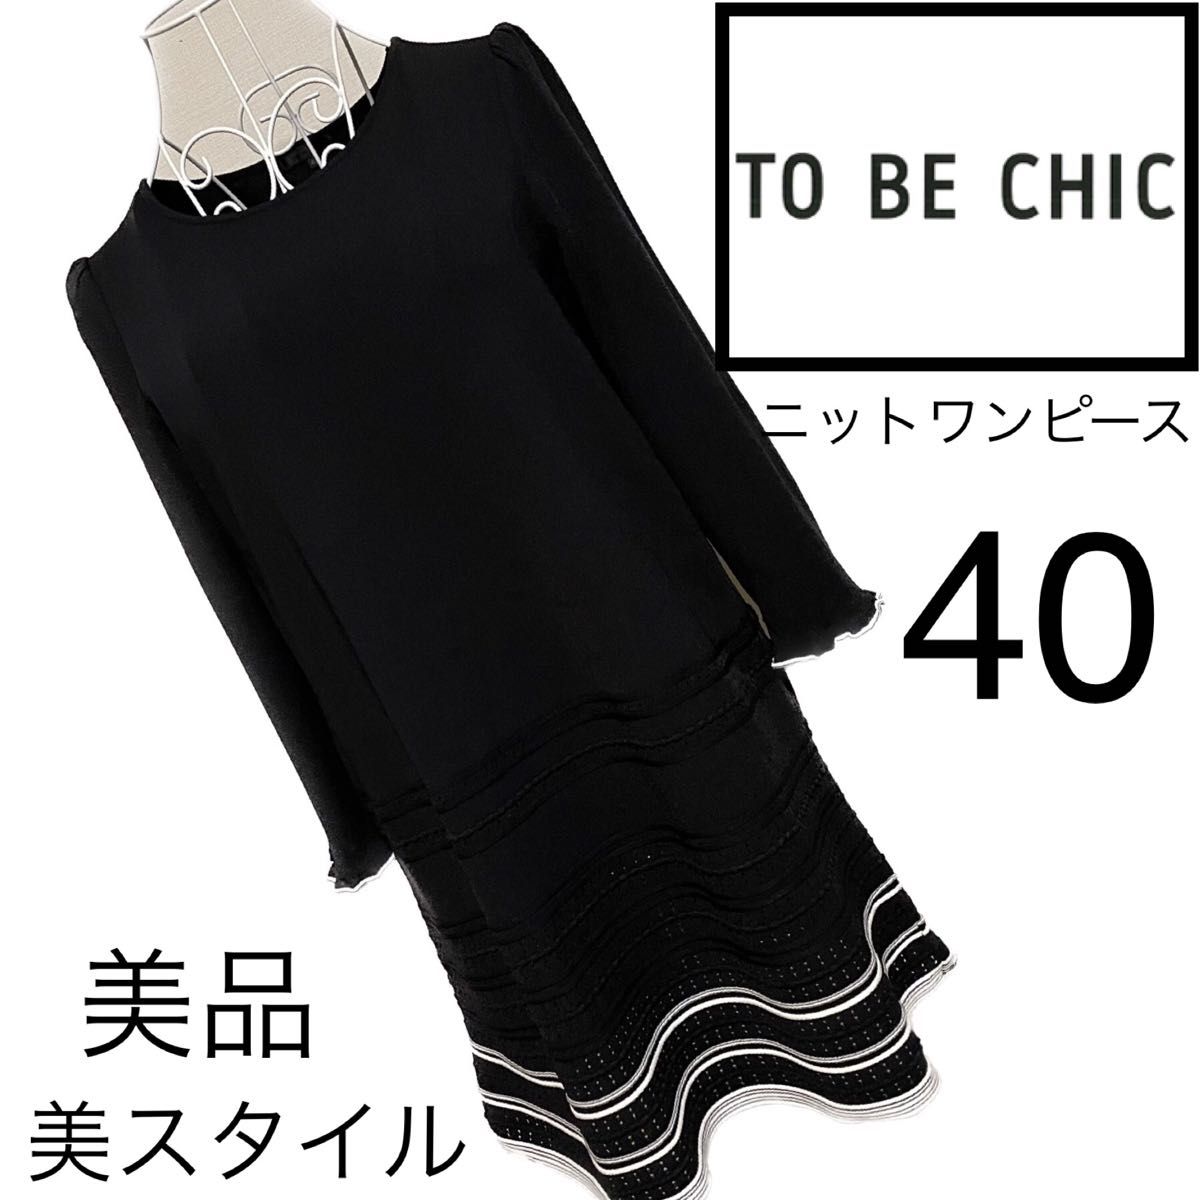 TO BE CHIC ニットワンピース 40 美品-